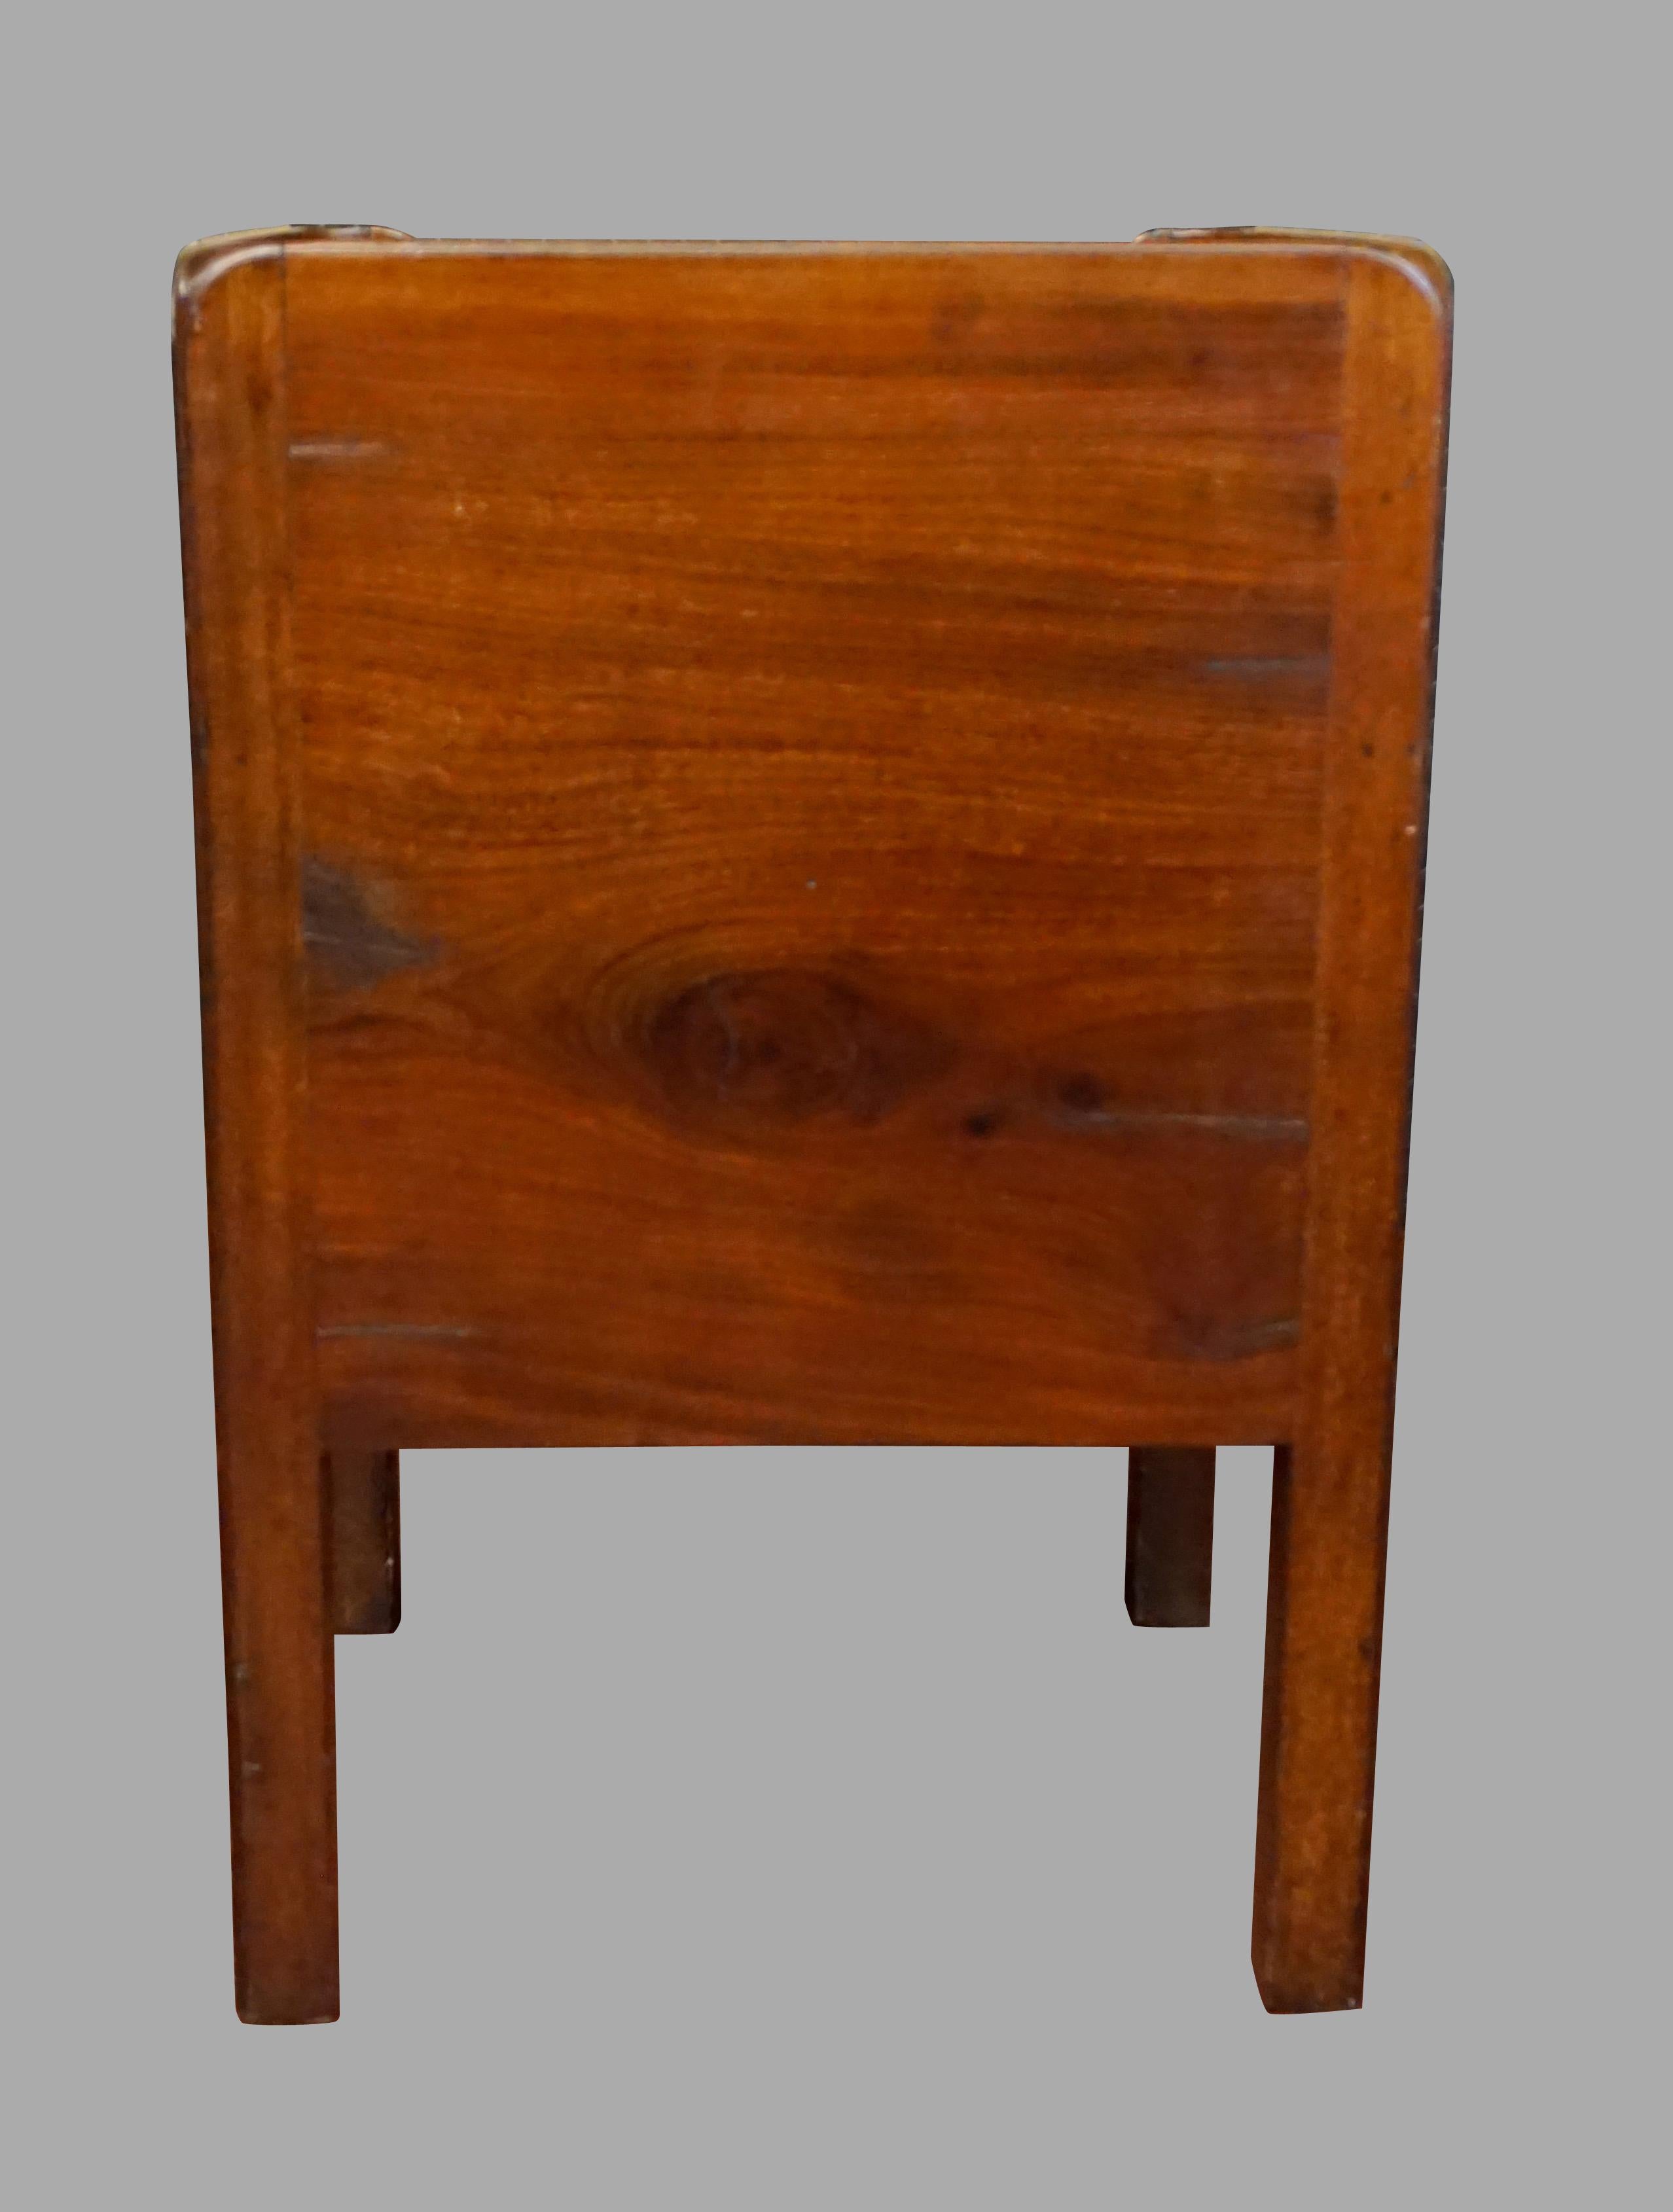 English George III Figured Mahogany Bedside Commode with Drawer 2